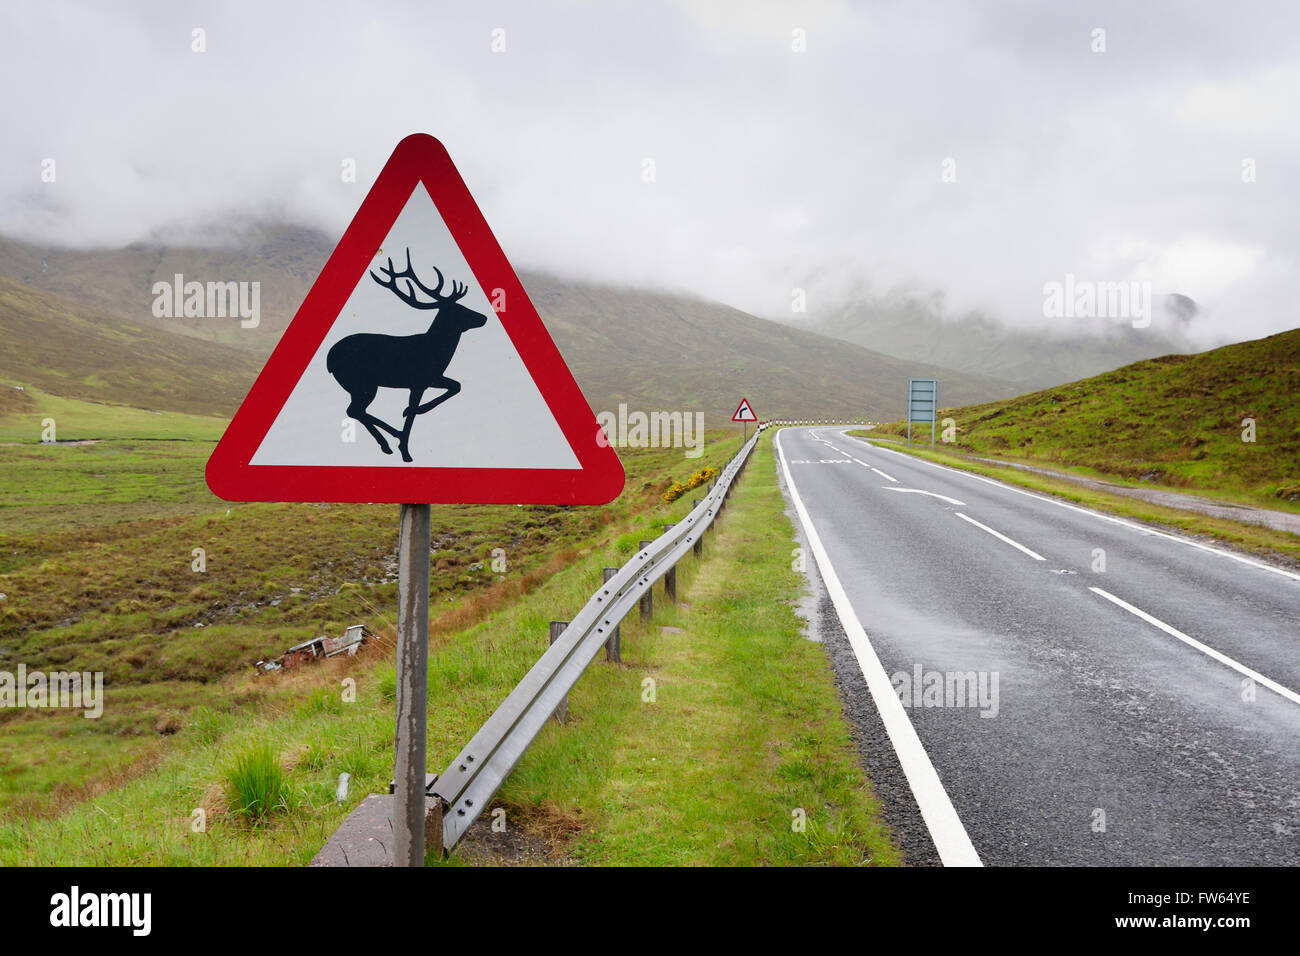 Attention deer crossing road sign, road with poor visibility, Scottish Highlands, Scotland Stock Photo